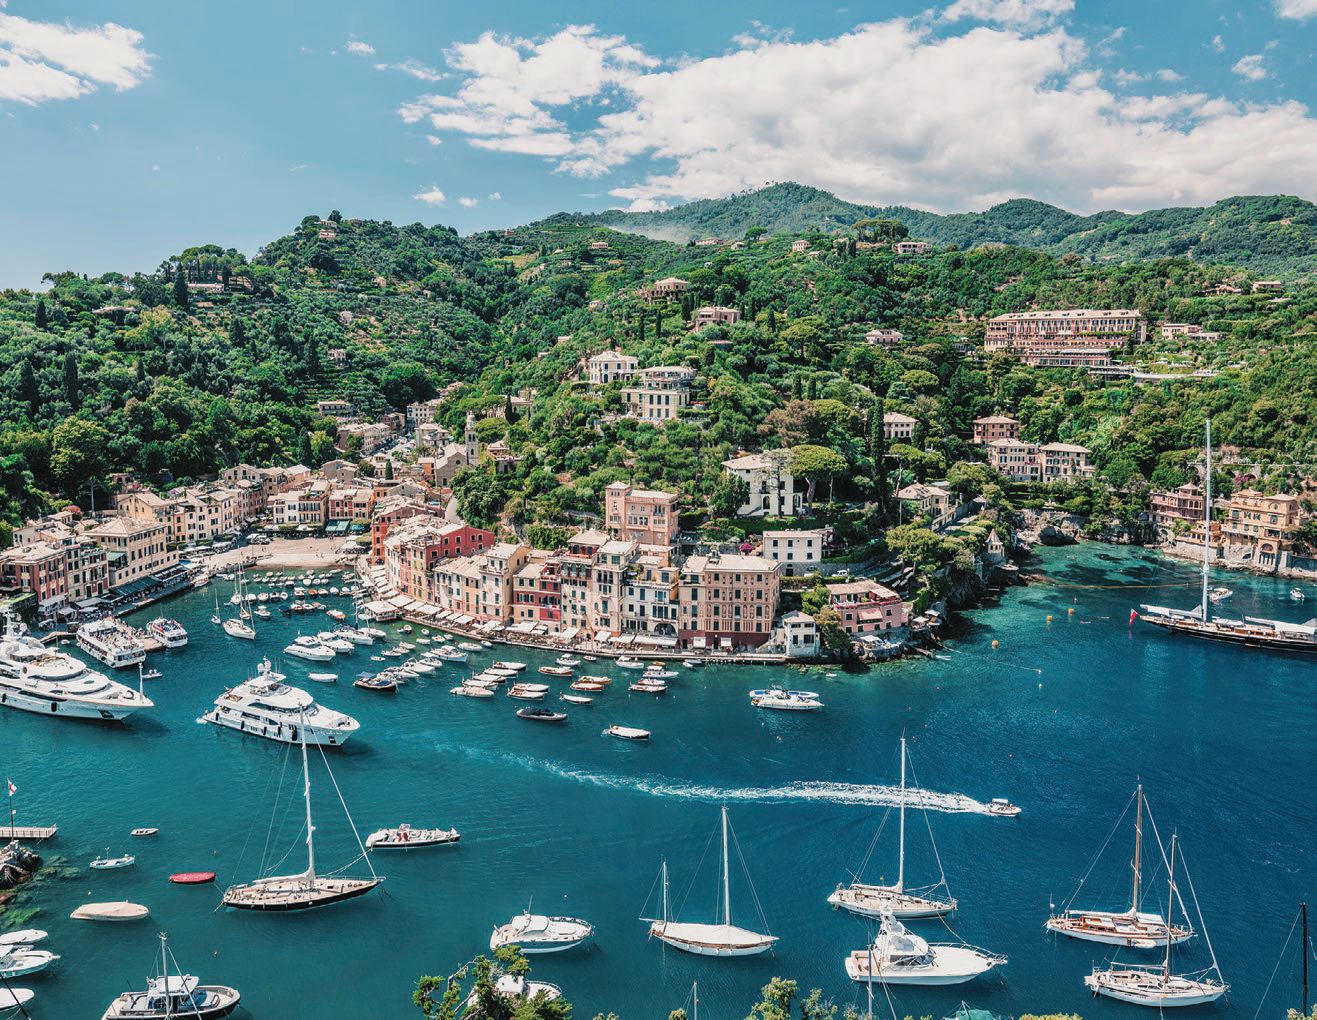 The staggering beauty of the Ligurian Coast sets the tone for the new Splendido Mare, a Belmond Hotel. PHOTO COURTESY OF BRANDS